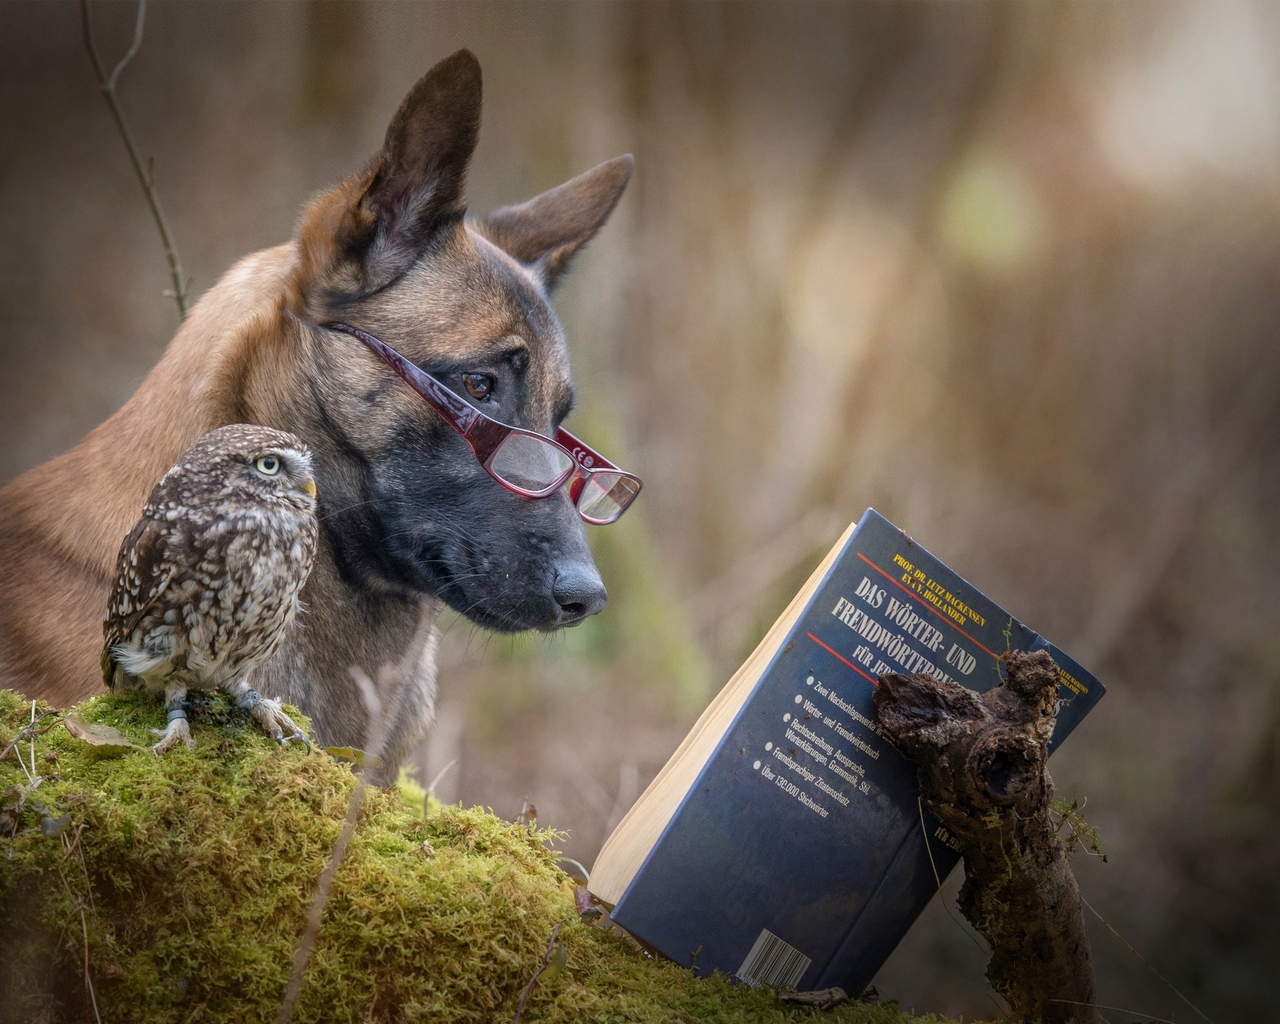 Dog and Owl Reading a Book for 1280 x 1024 resolution